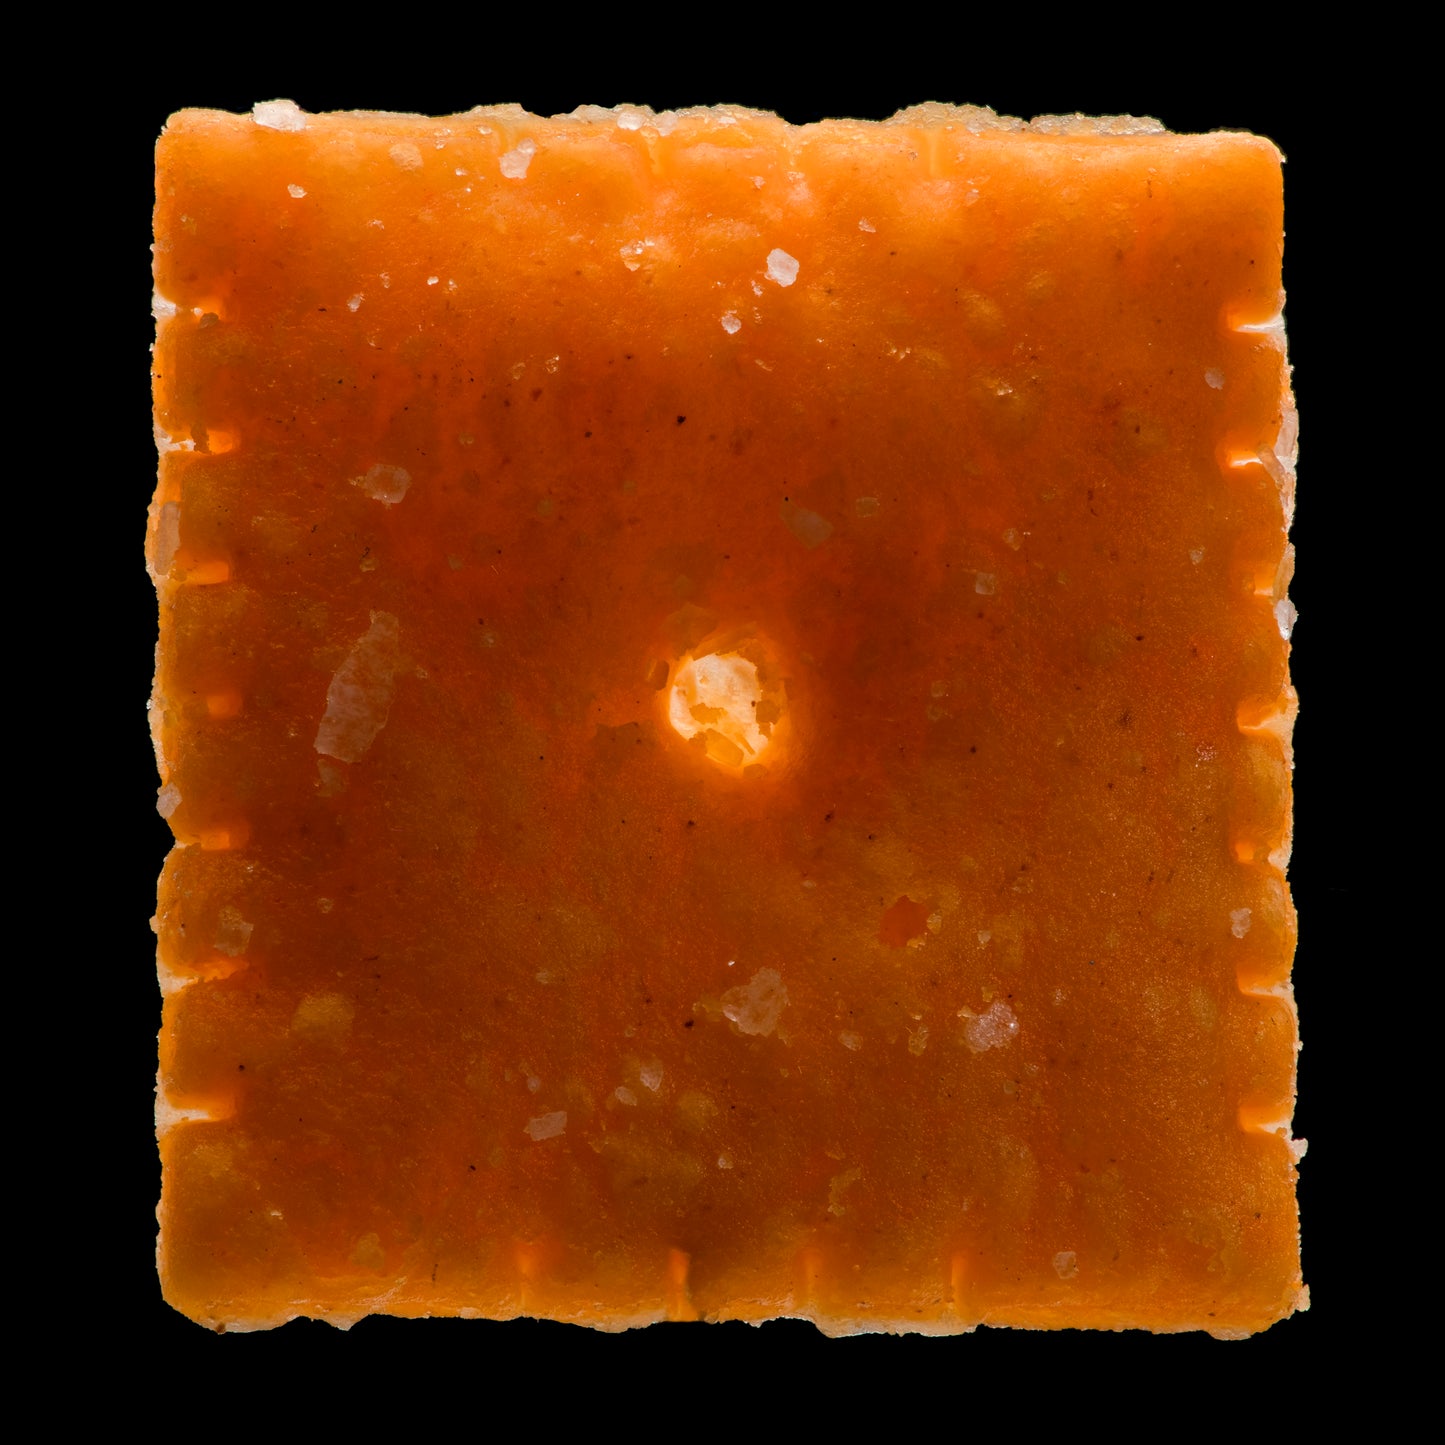 The Cheez-it